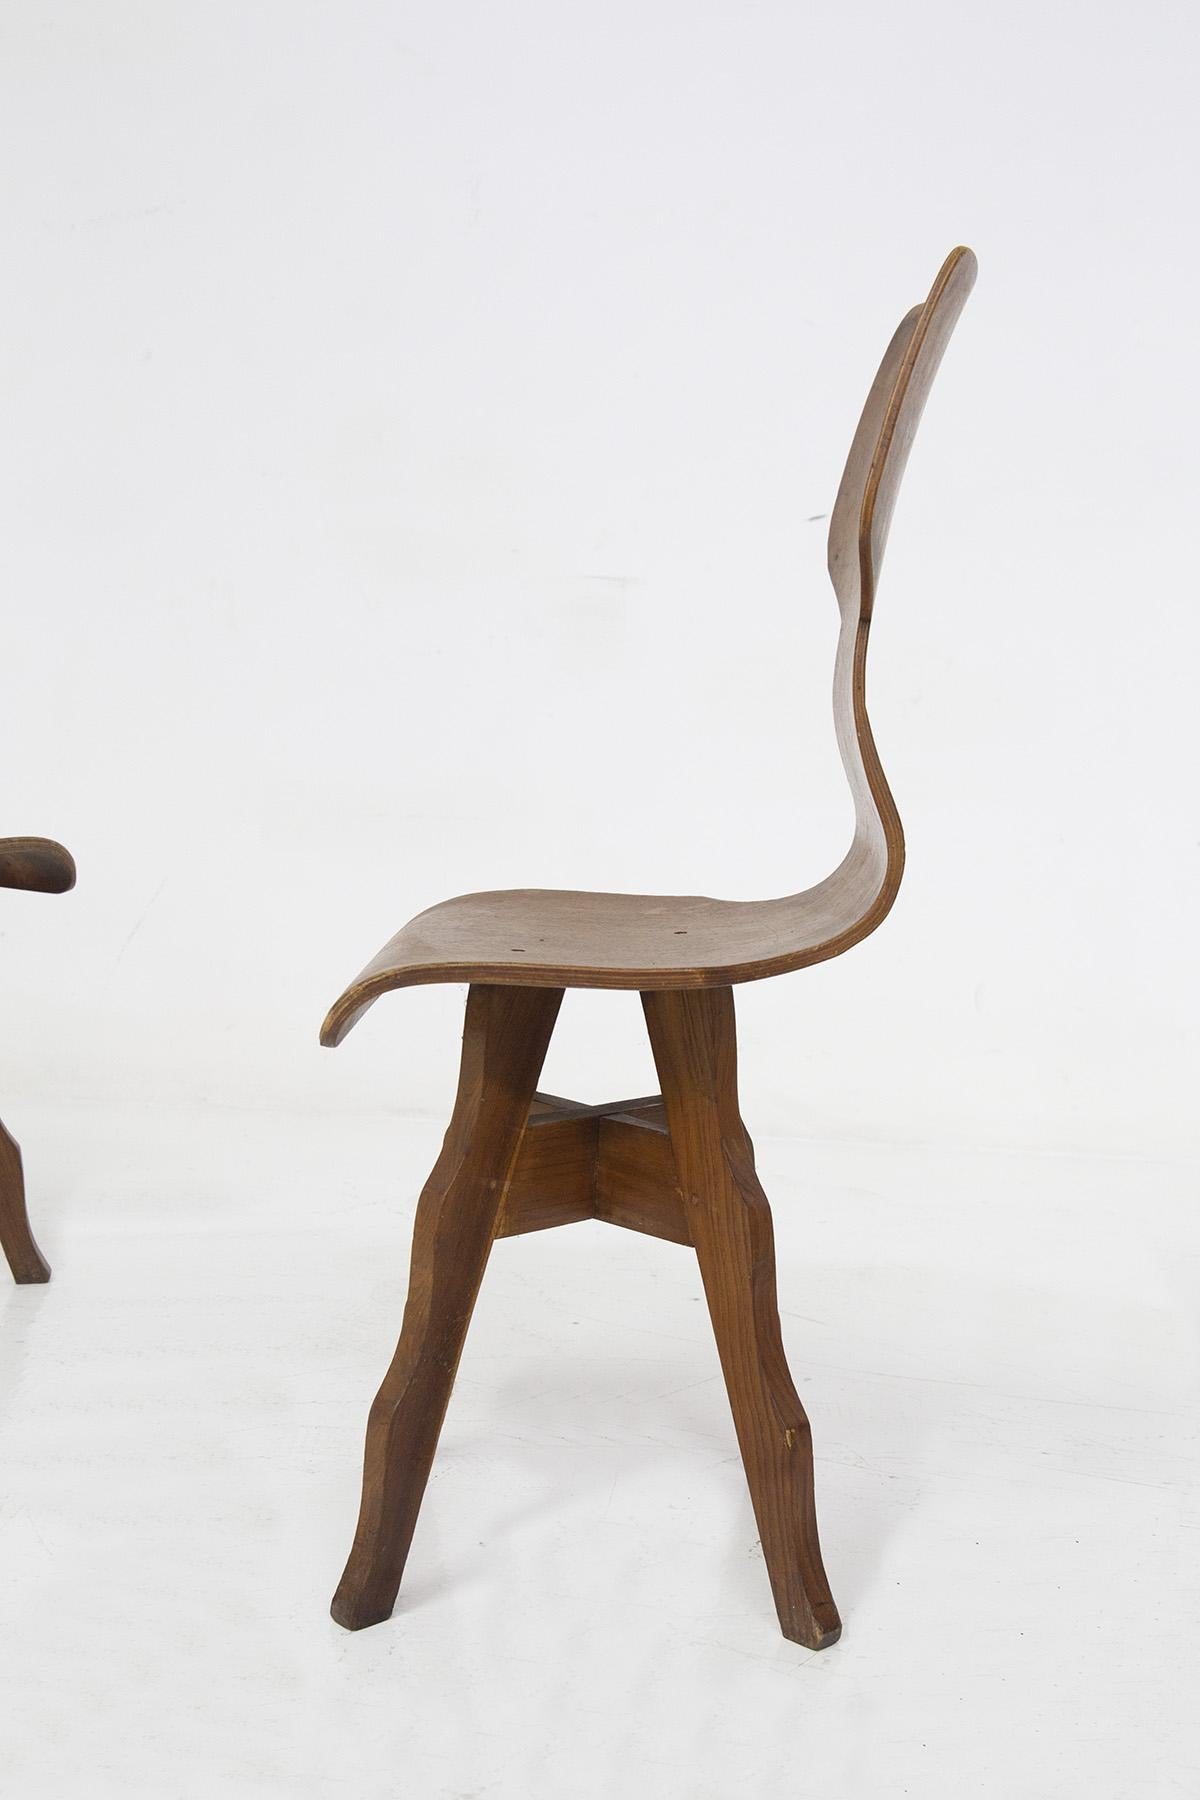 Scuola Torinese Rare Sinuous Chairs in Wood 3